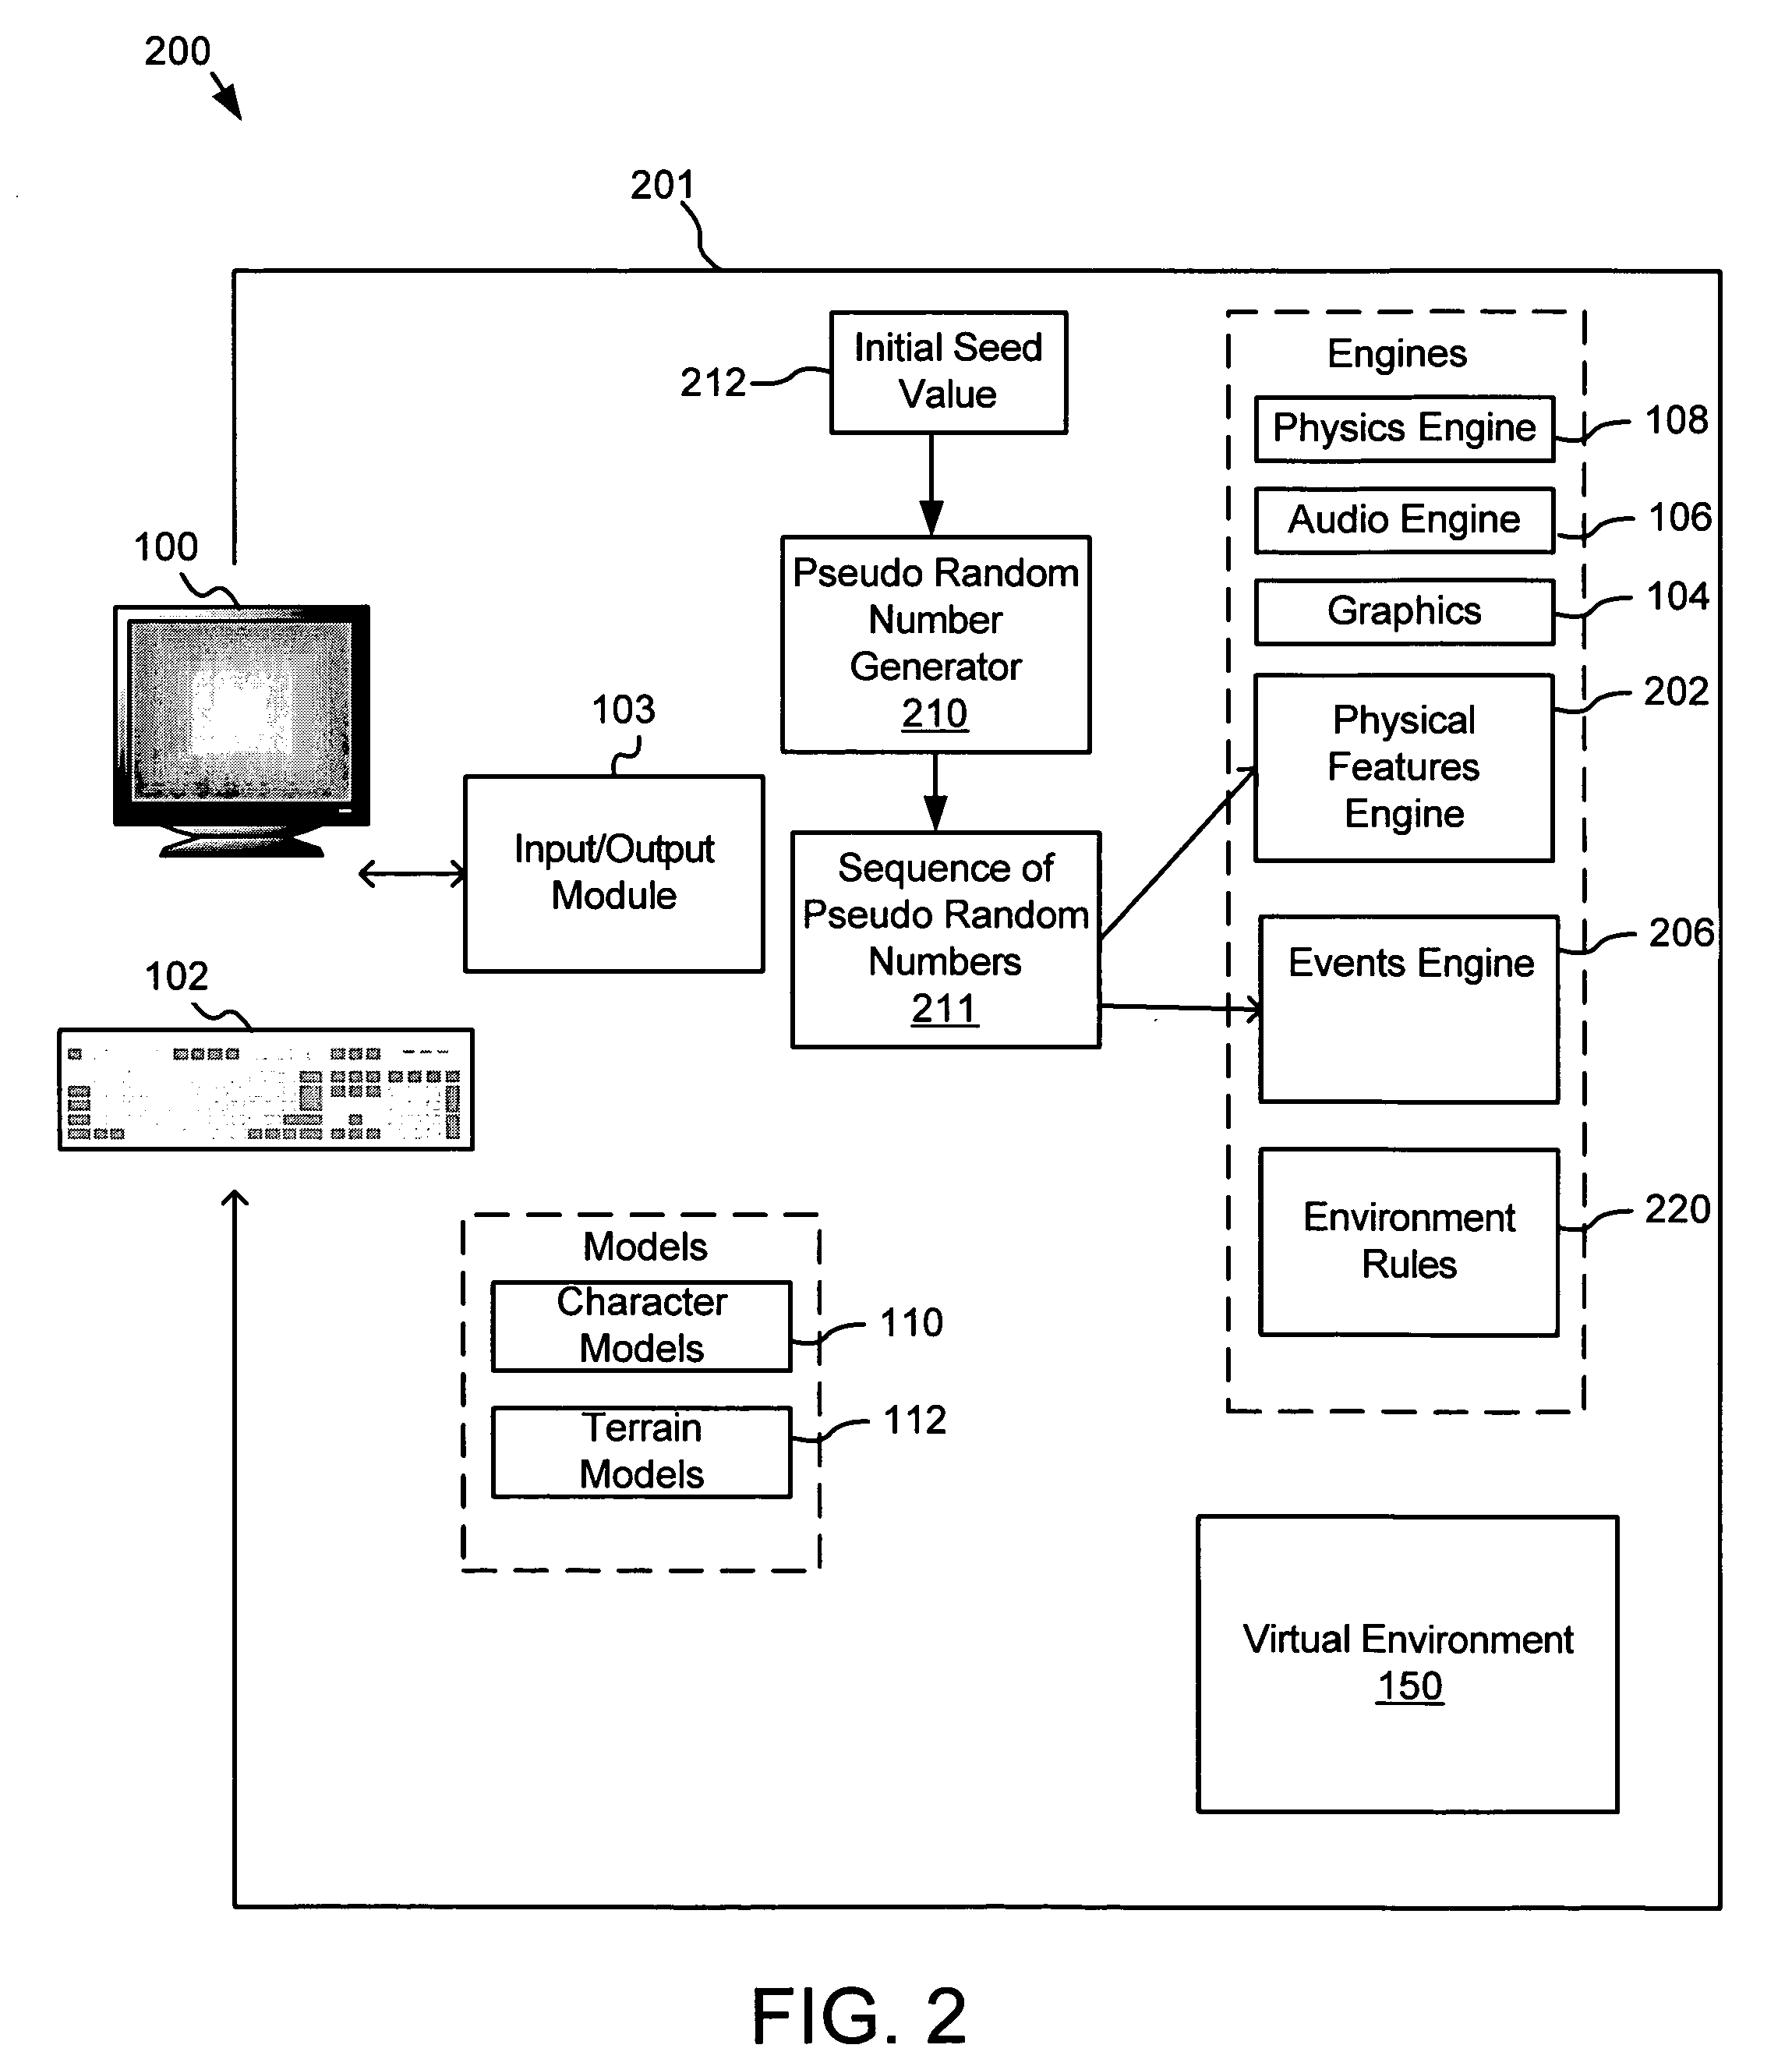 Apparatus, system, and method for automated generation of a virtual environment for software applications